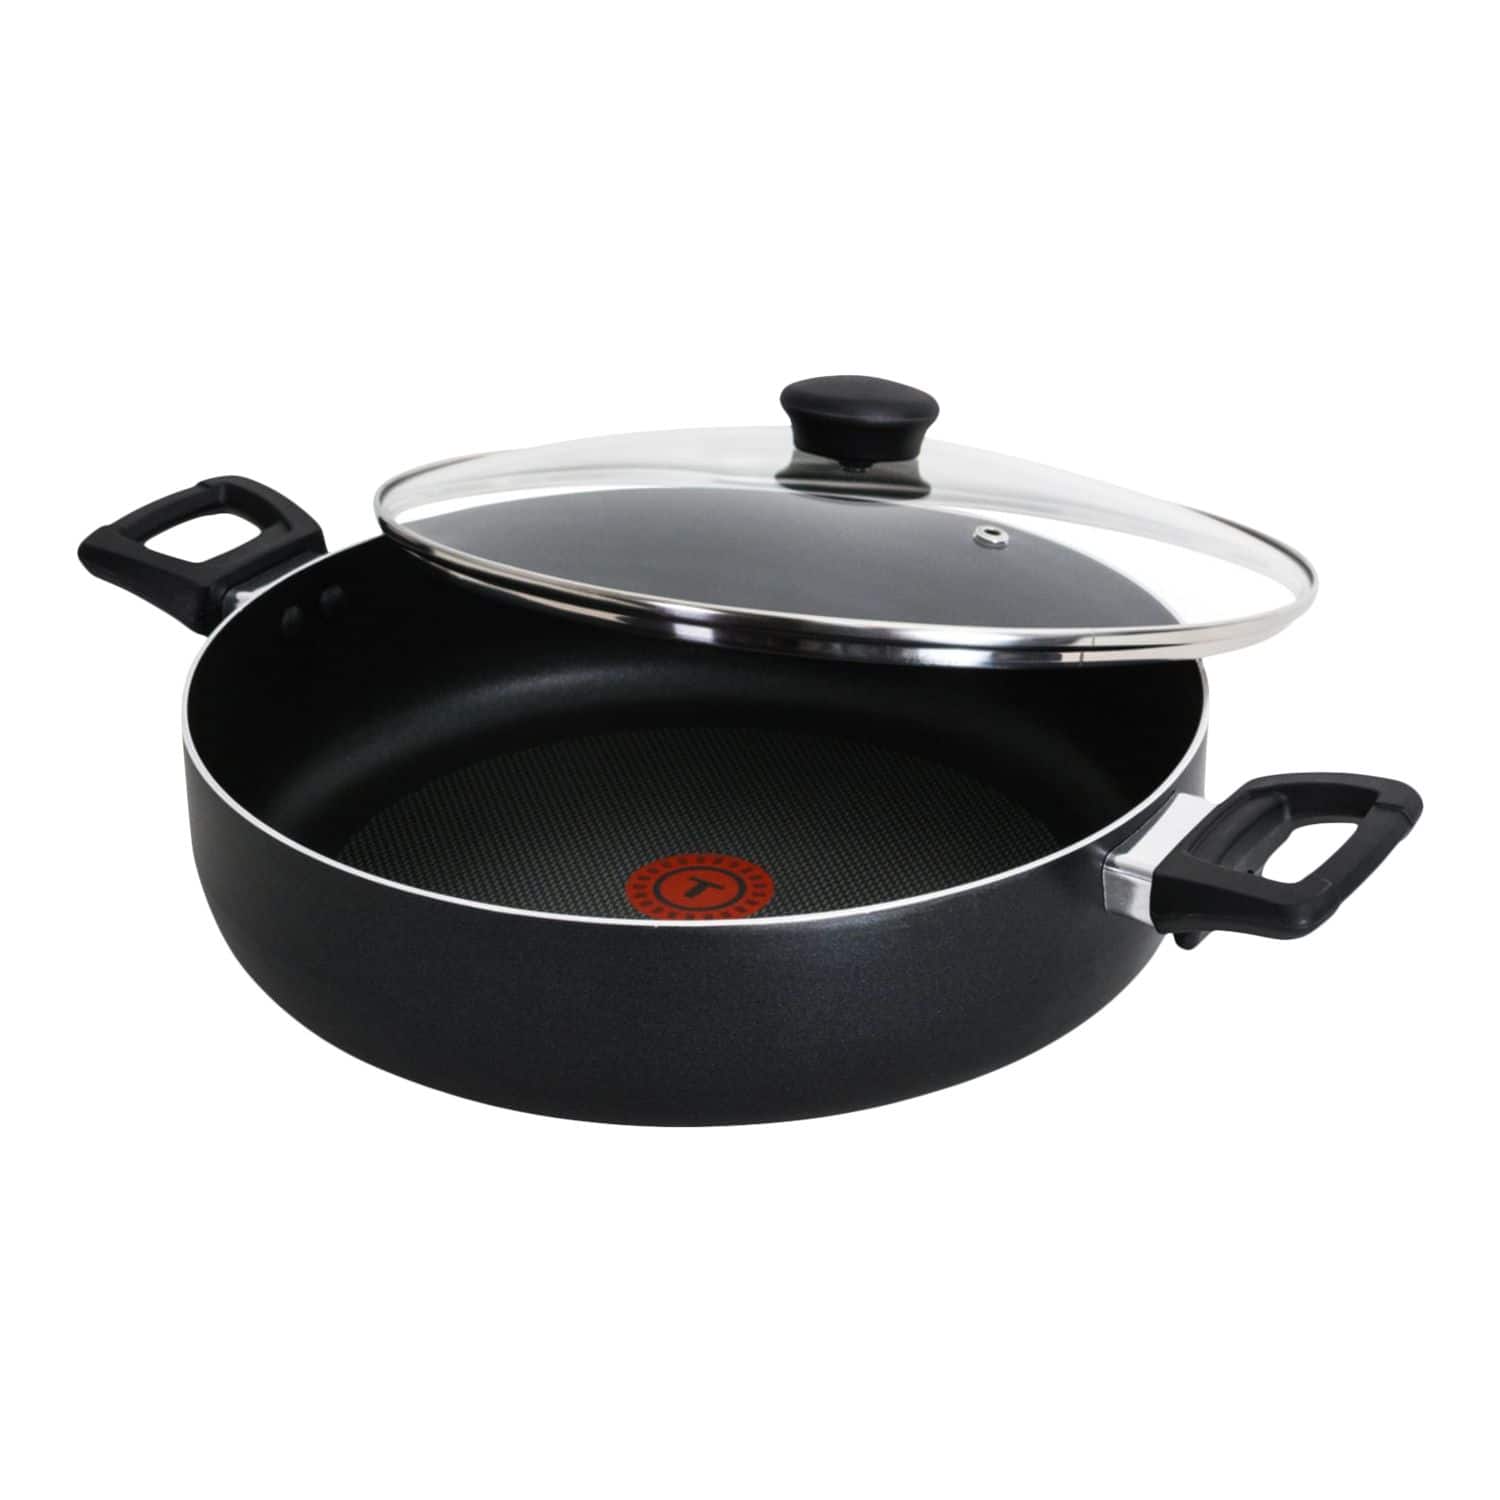 T-fal Specialty Nonstick Saute Pan with Glass Lid 5 Quart Oven Safe 350F  Cookware, Pots and Pans, Dishwasher Safe Black